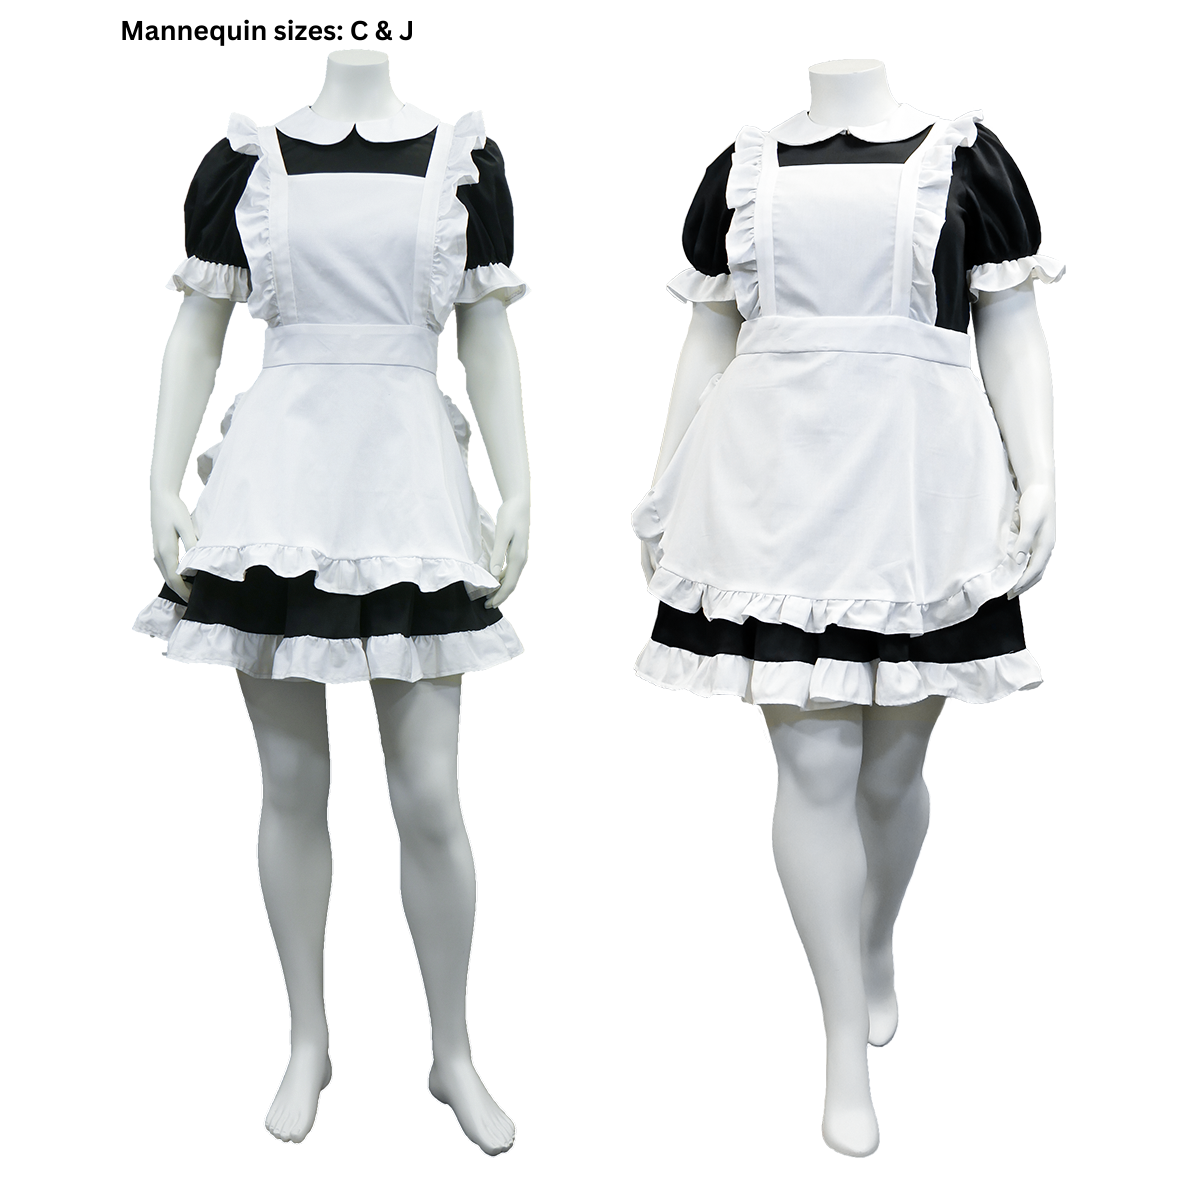 A photo of the front view of our female and plus size female mannequins in the completed Maid Outfit (sizes C and J) with the apron.